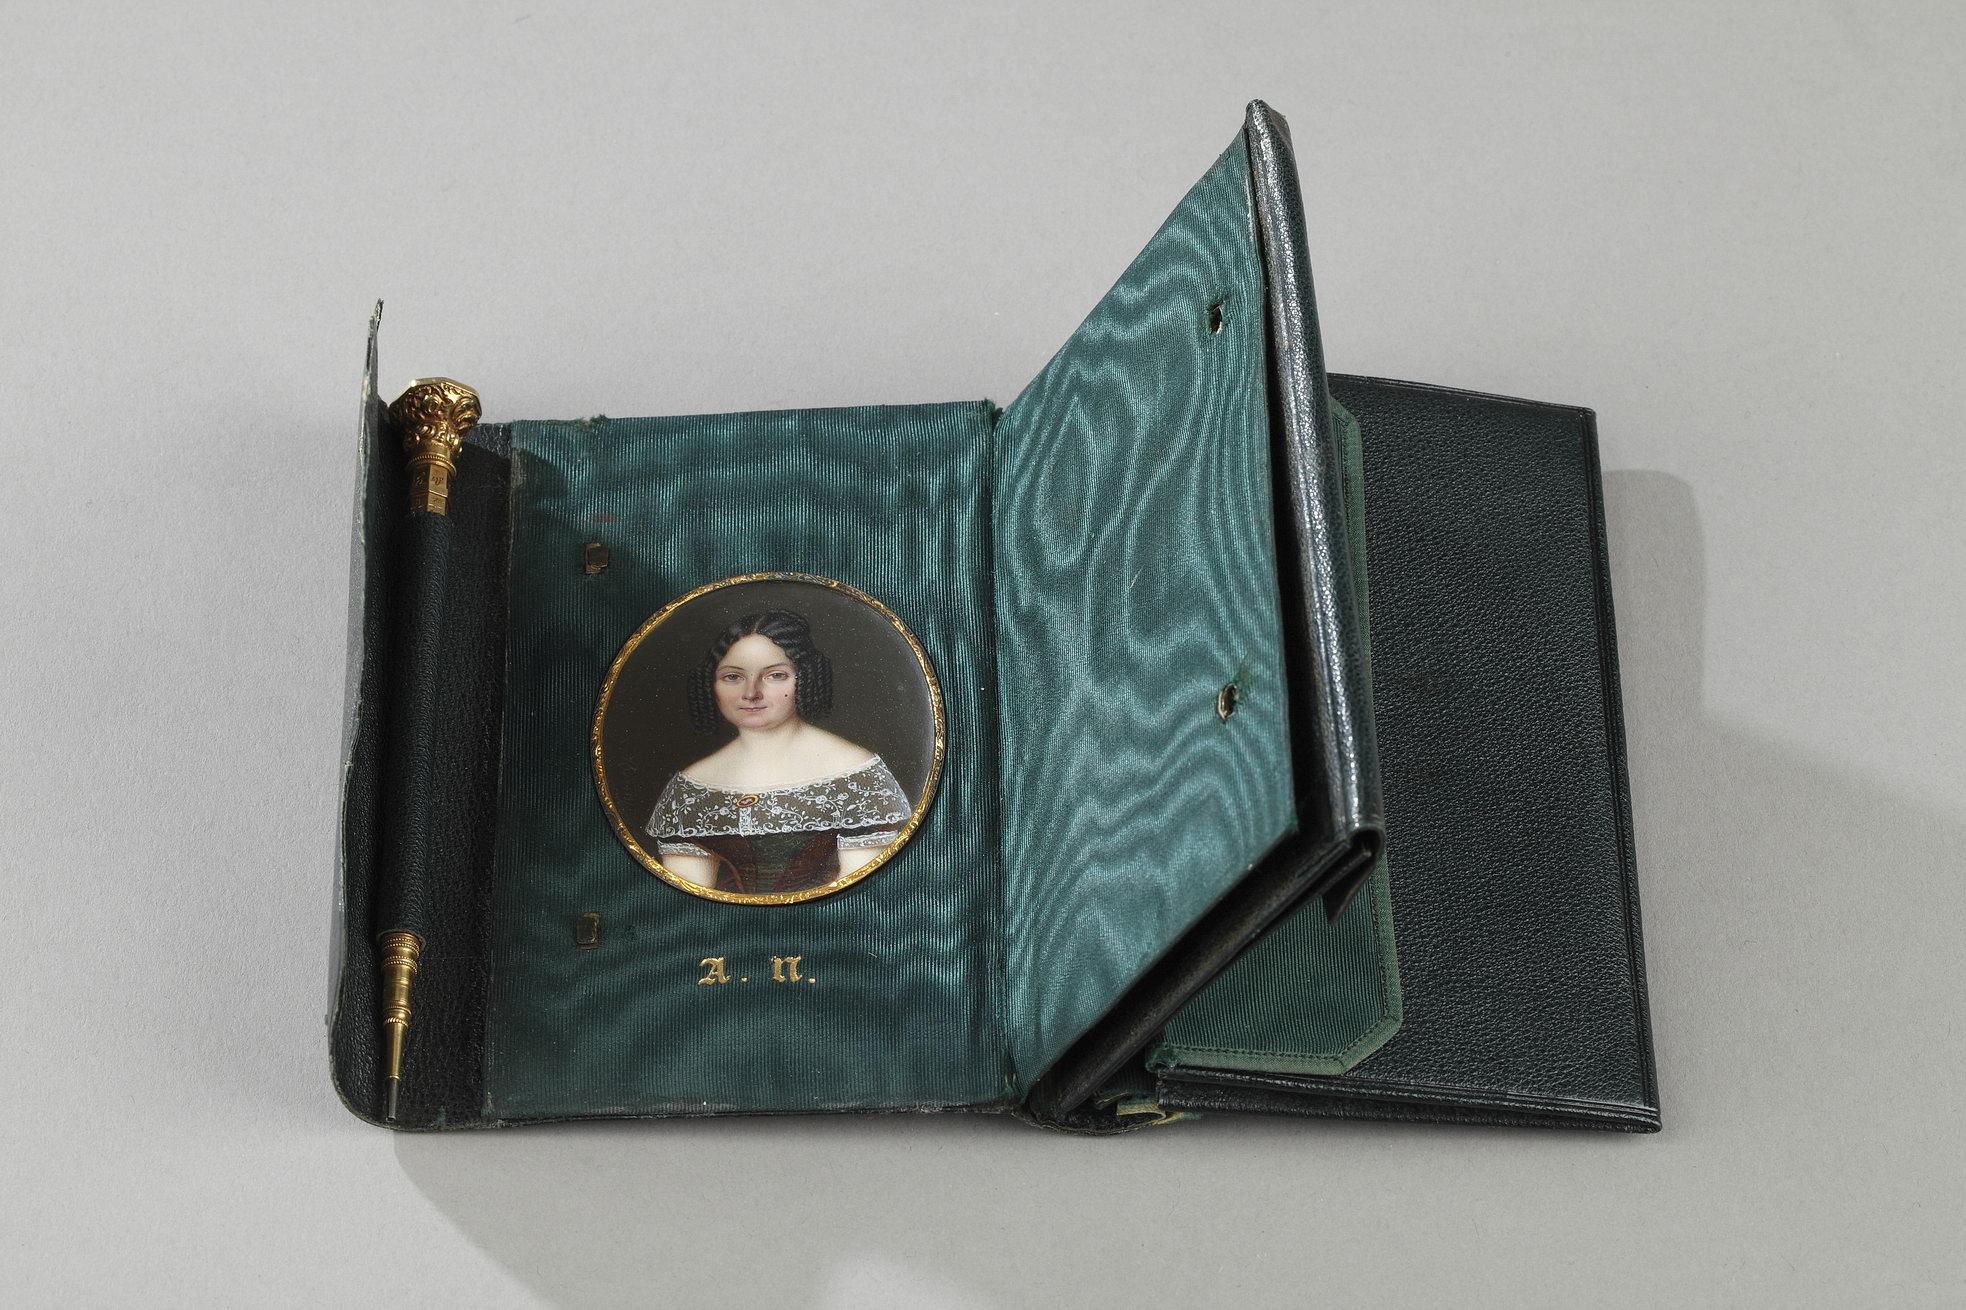 Green leather case with several gussets and bound sheets. The case opens with a gold clasp. Inside the case, an oval miniature is preserved. This represents a young woman in bust wearing a dress and lace scarf adorned with a brooch. The miniature is